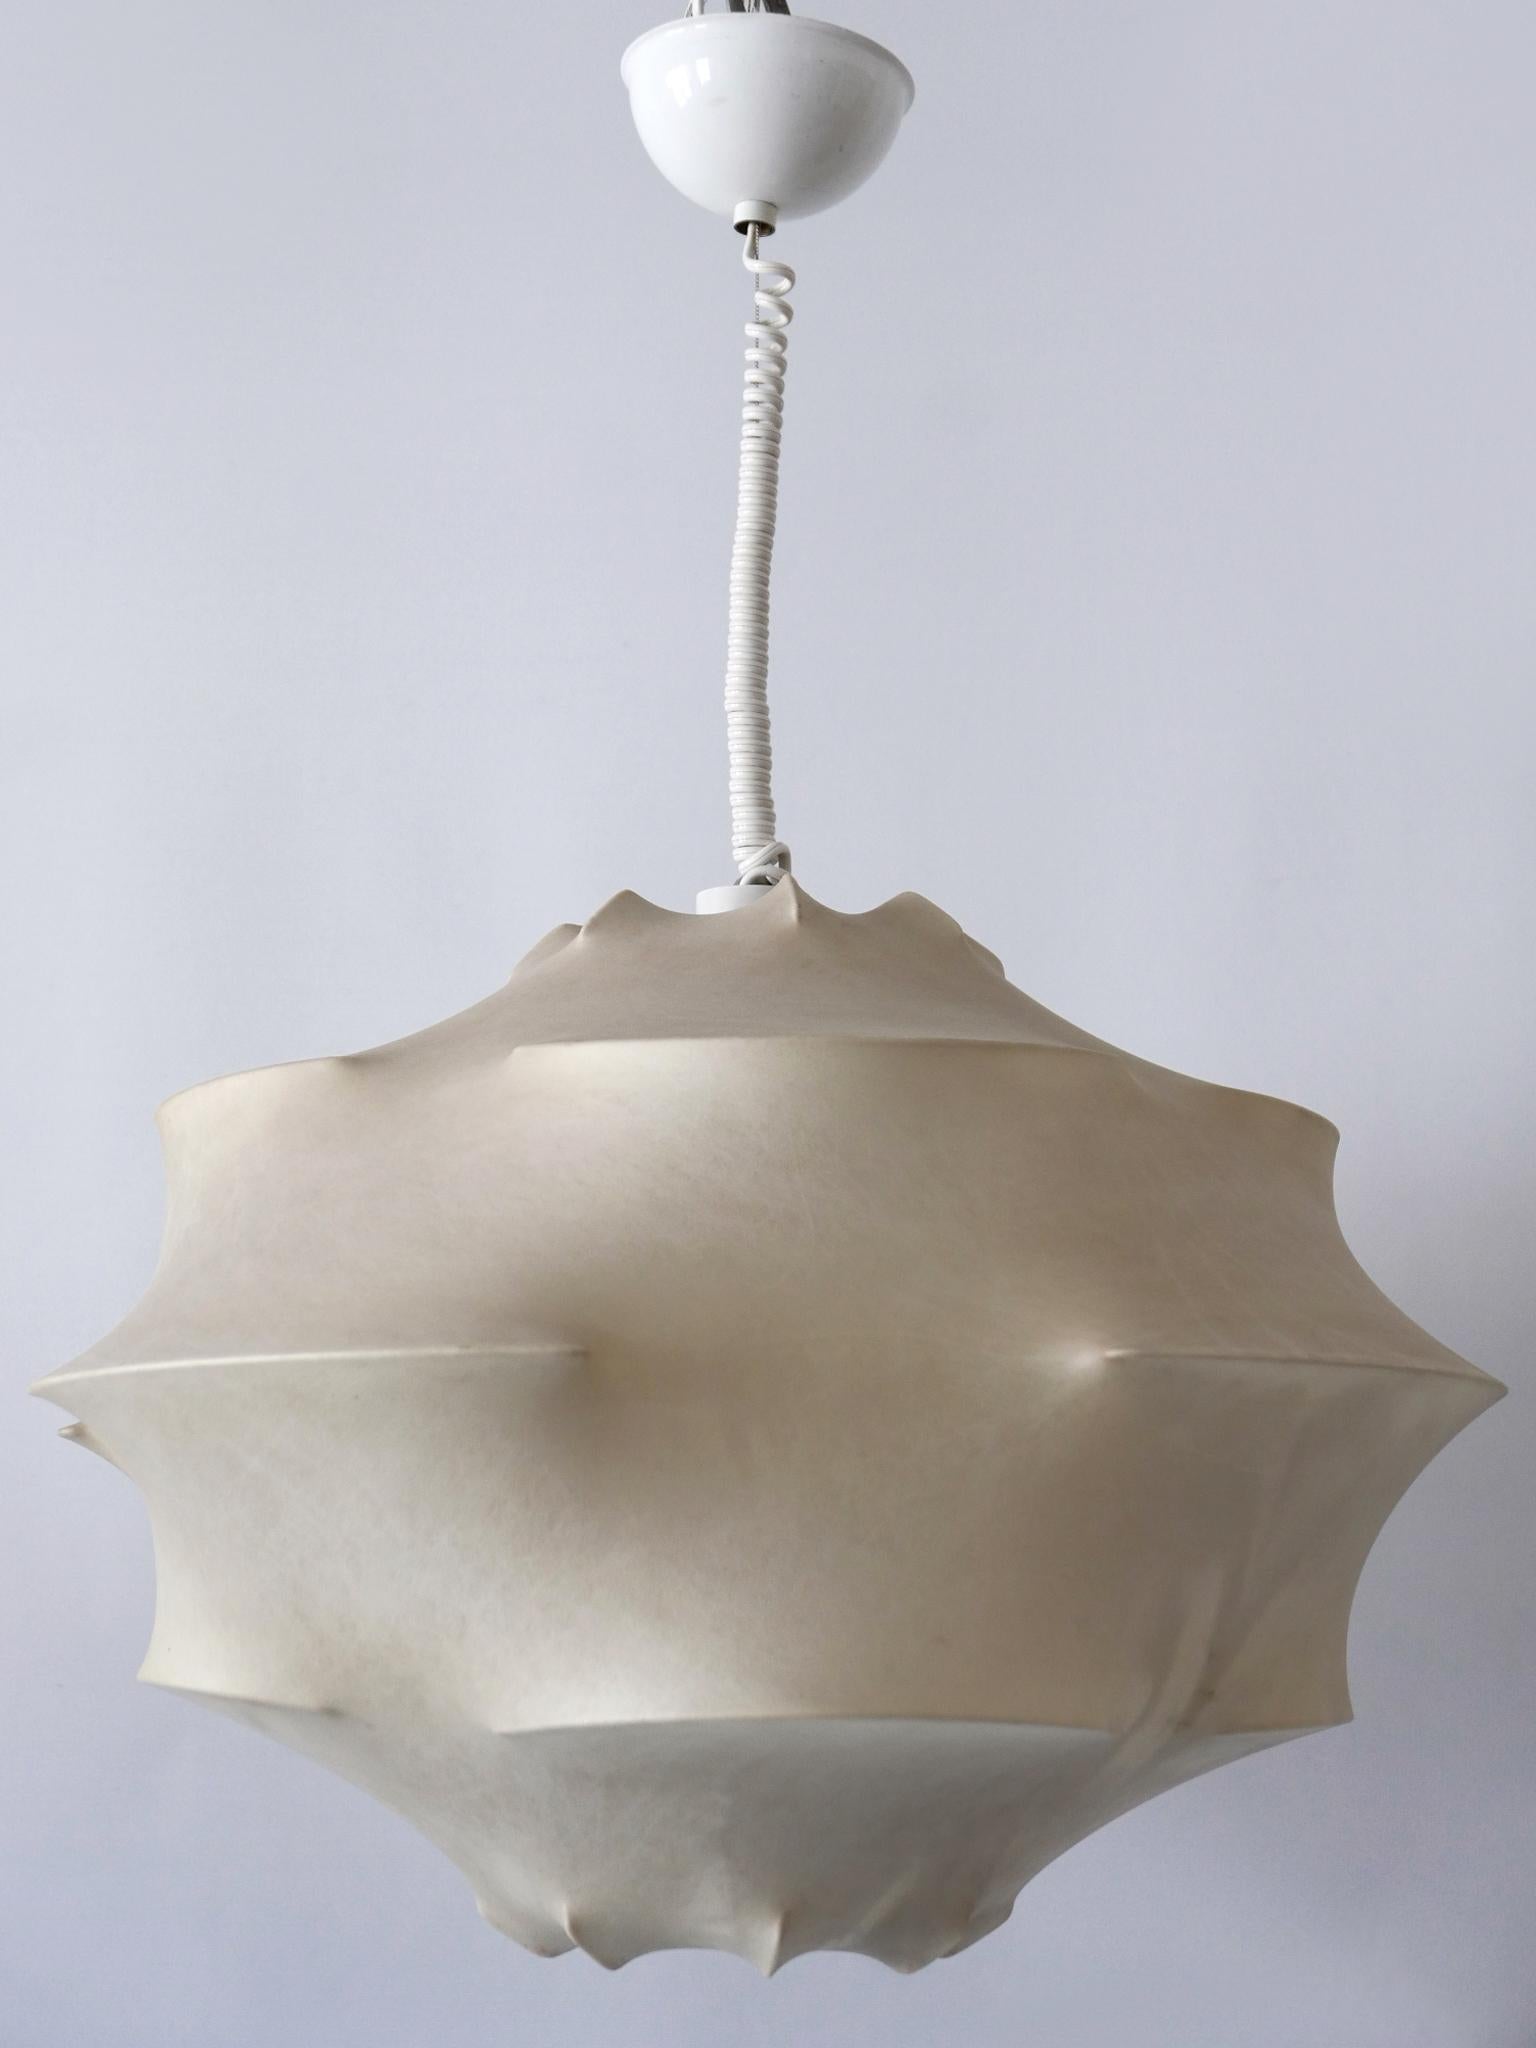 Extremely rare, highly decorative and large Mid-Century Modern cocoon pendant lamp or hanging light. Designed & manufactured probably by Flos, Italy, 1960s.

Executed in cream colored sprayed latex material and metal, the pendant lamp needs 3 x